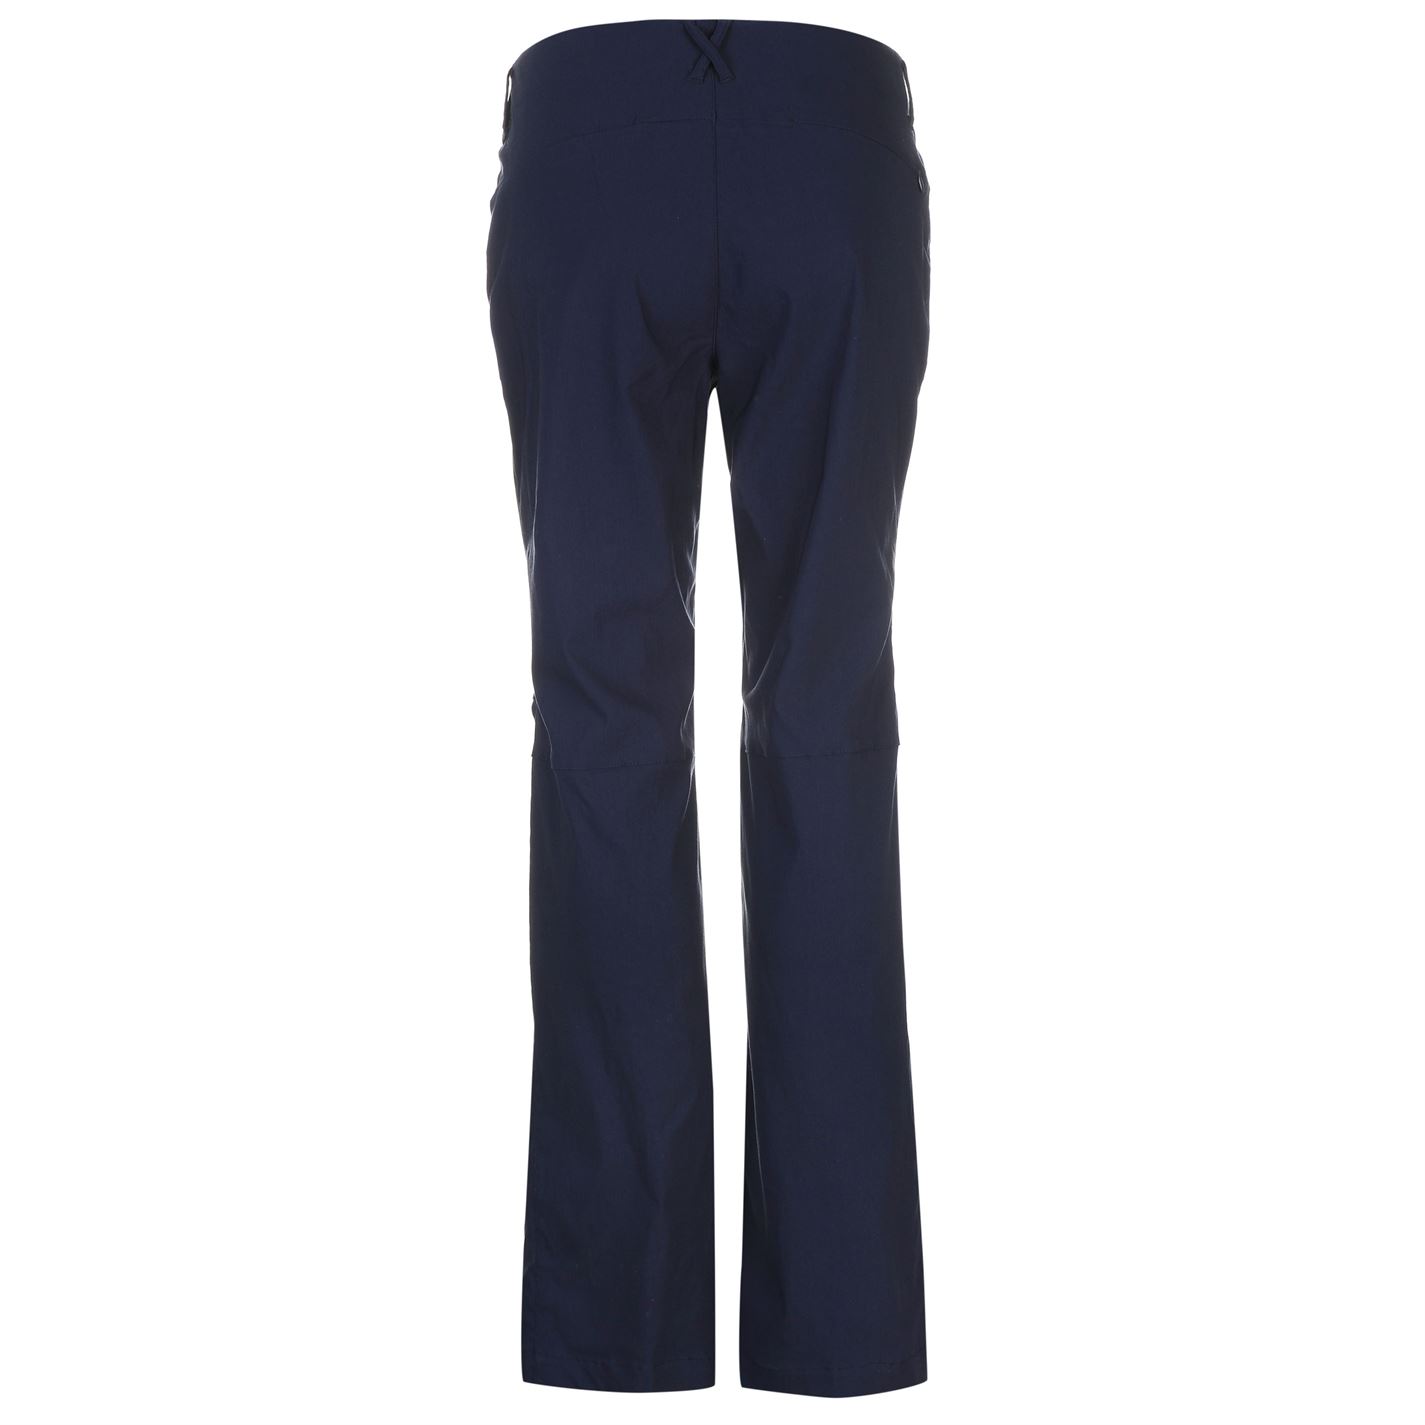 Karrimor Womens Ladies Panther Trousers Zip Fly Midweight Pants Bottoms ...